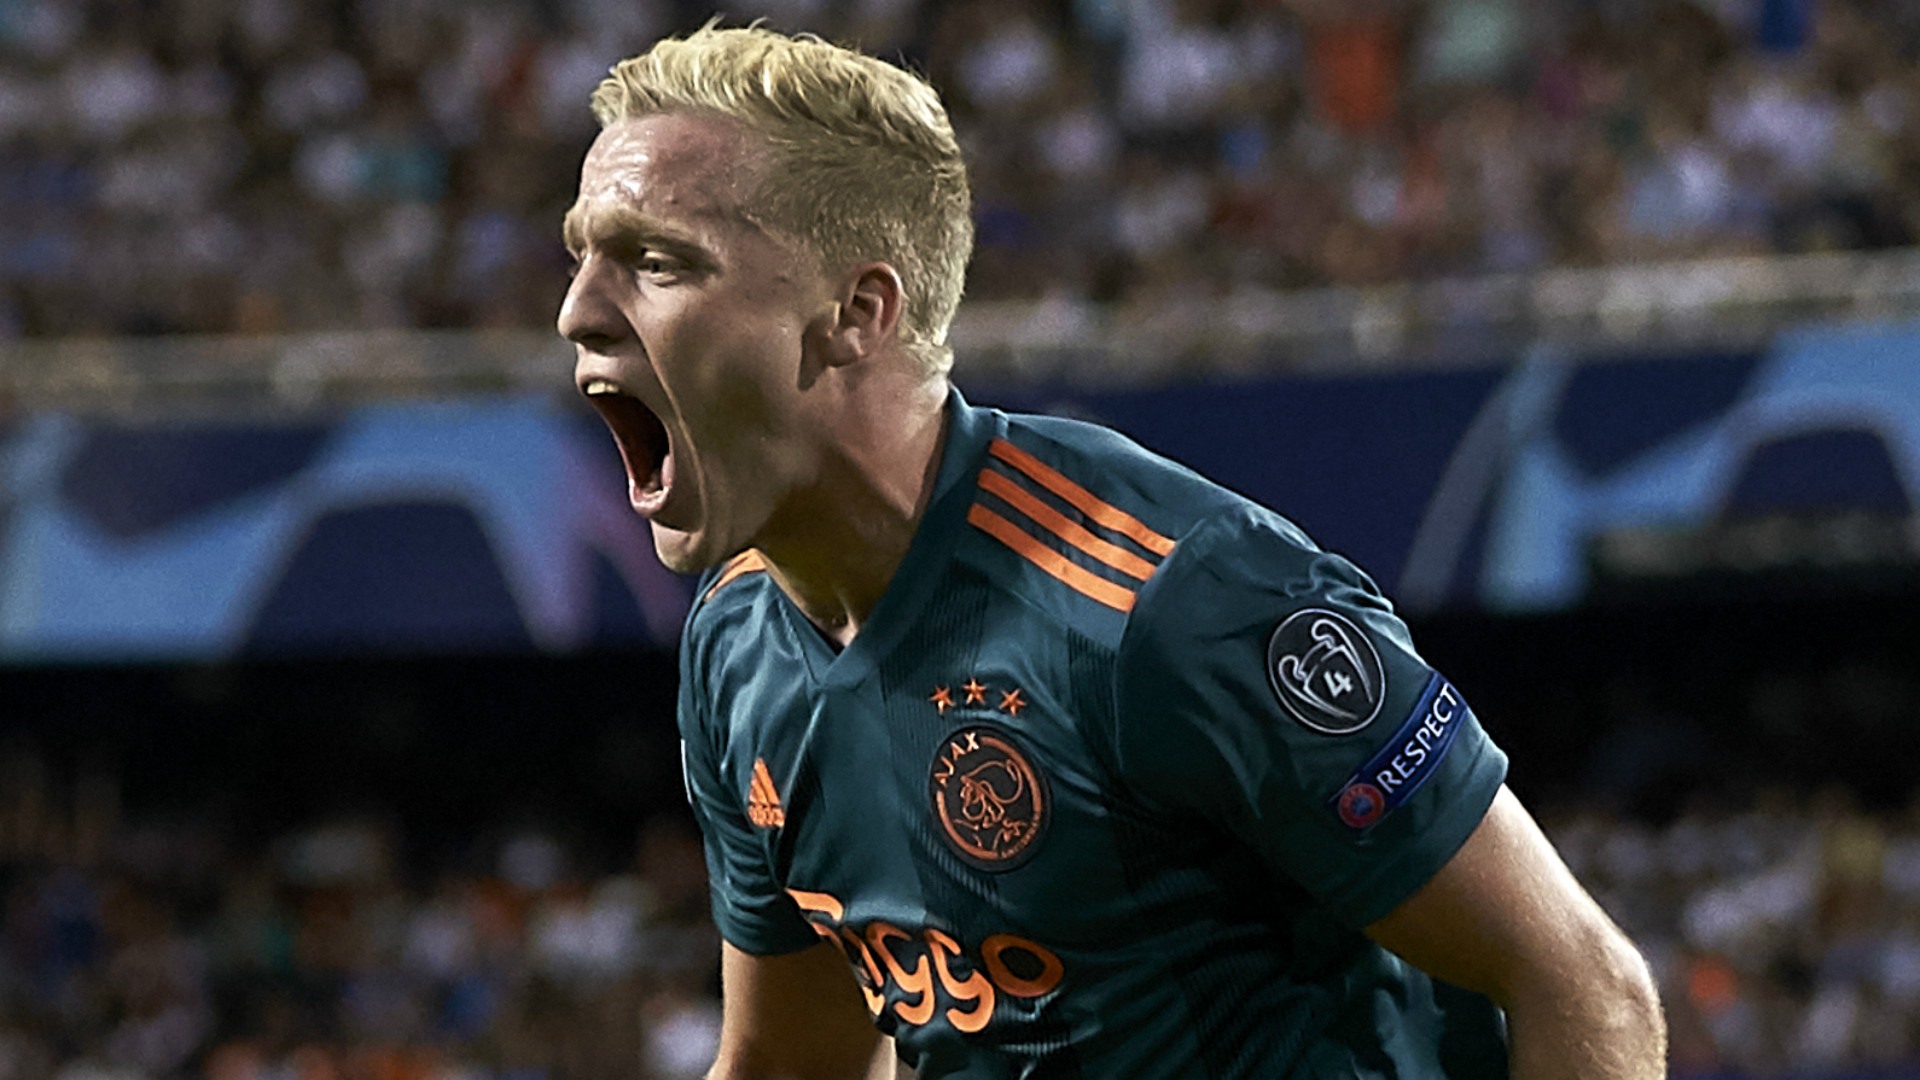 Arsenal really wanted Van de Beek but Man Utd is the right choice, Swart claims